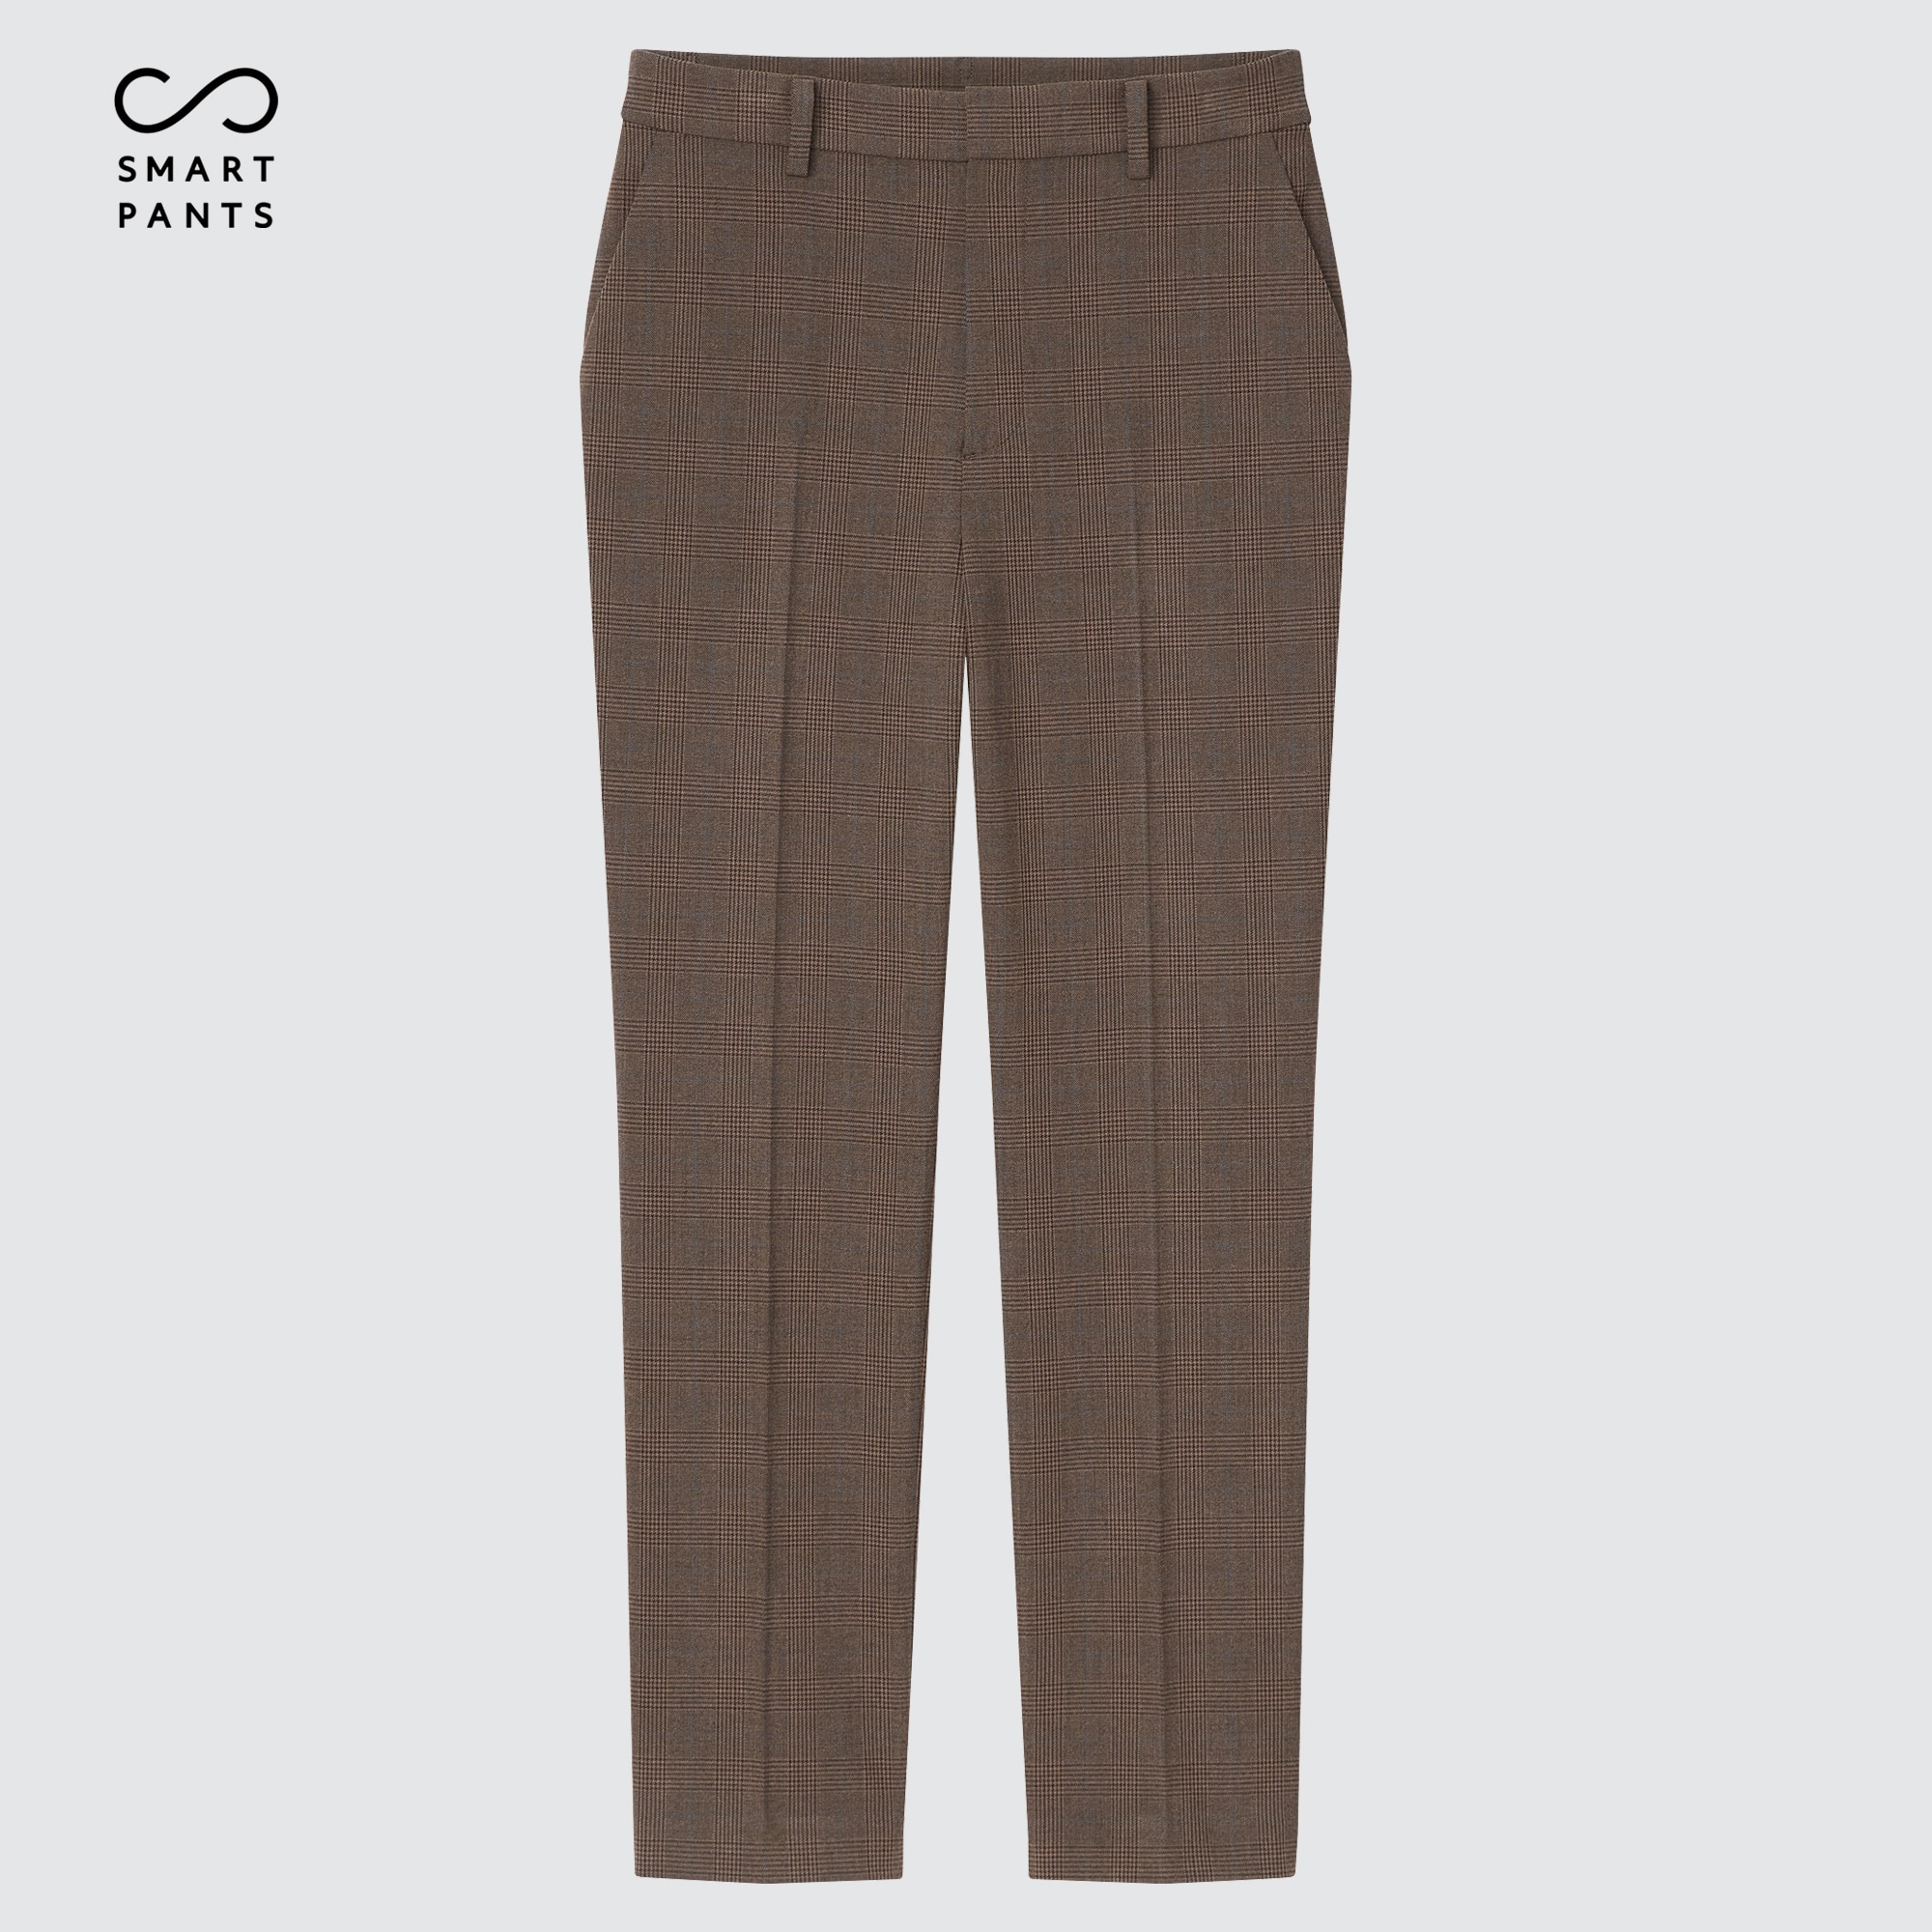 UNIQLO Smart Ankle Pants (2-Way Stretch Jersey, Tall) | StyleHint